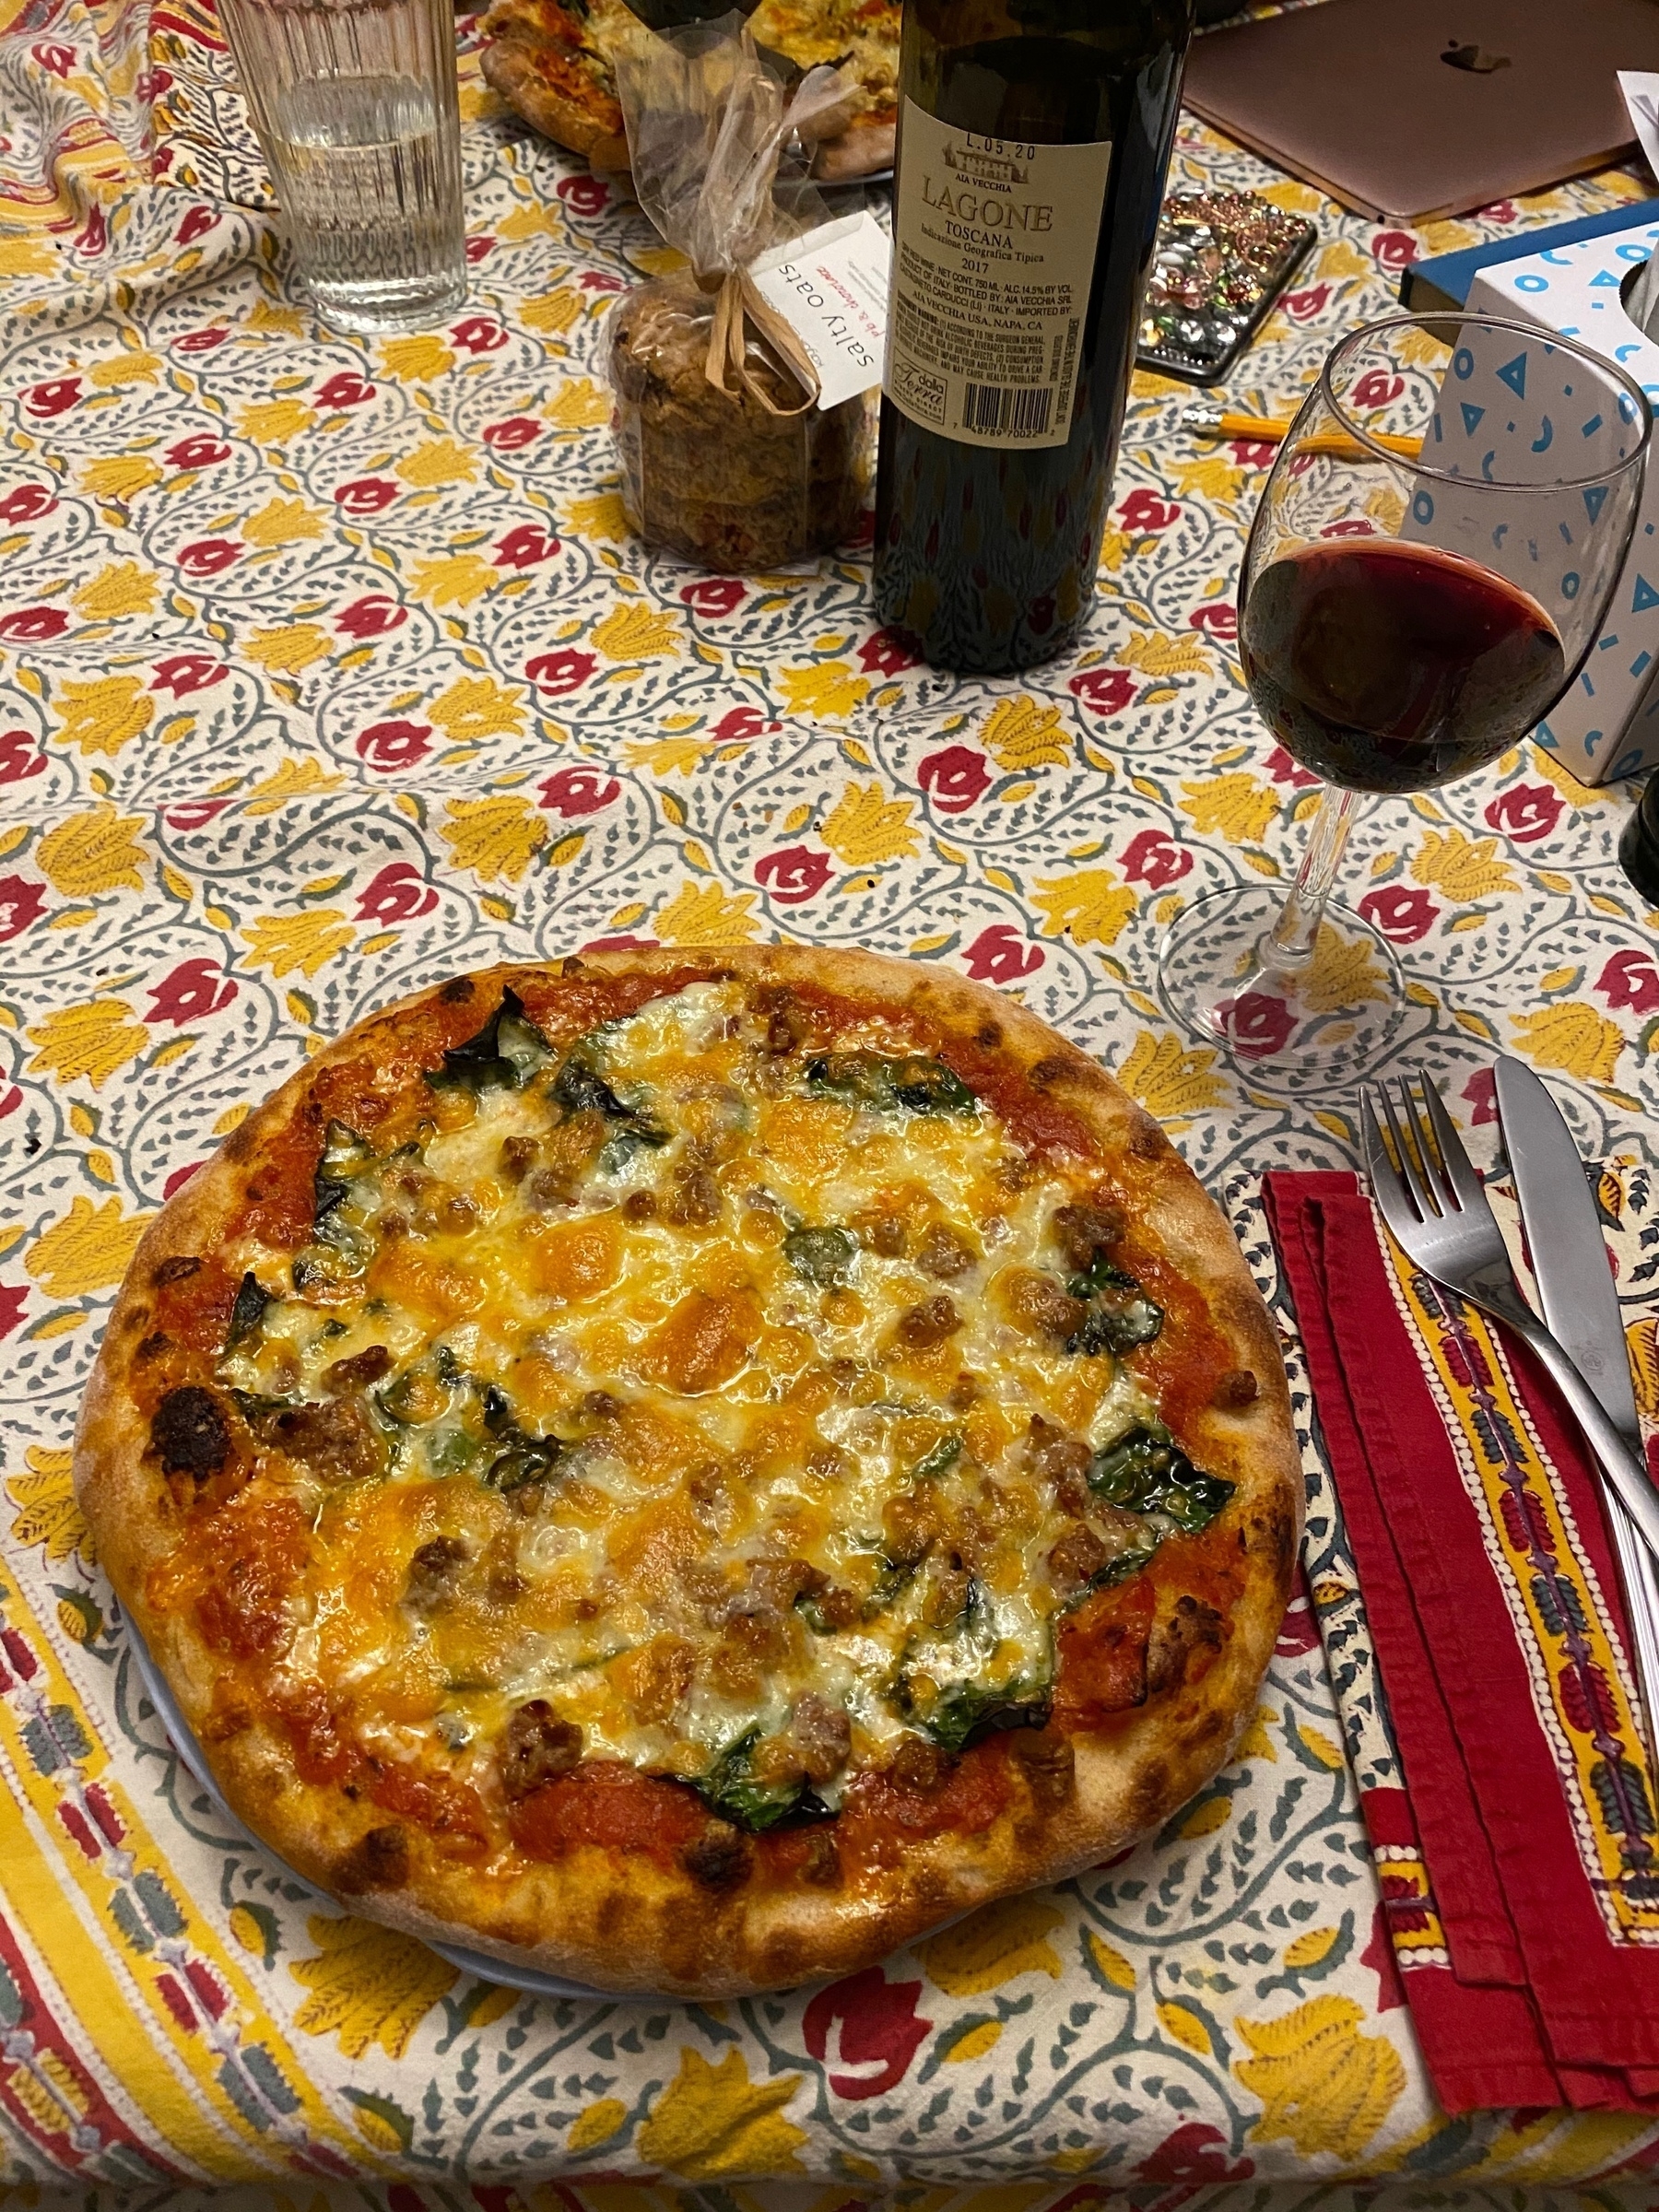 A small pizza on a table with a glass of wine and a wine bottle.